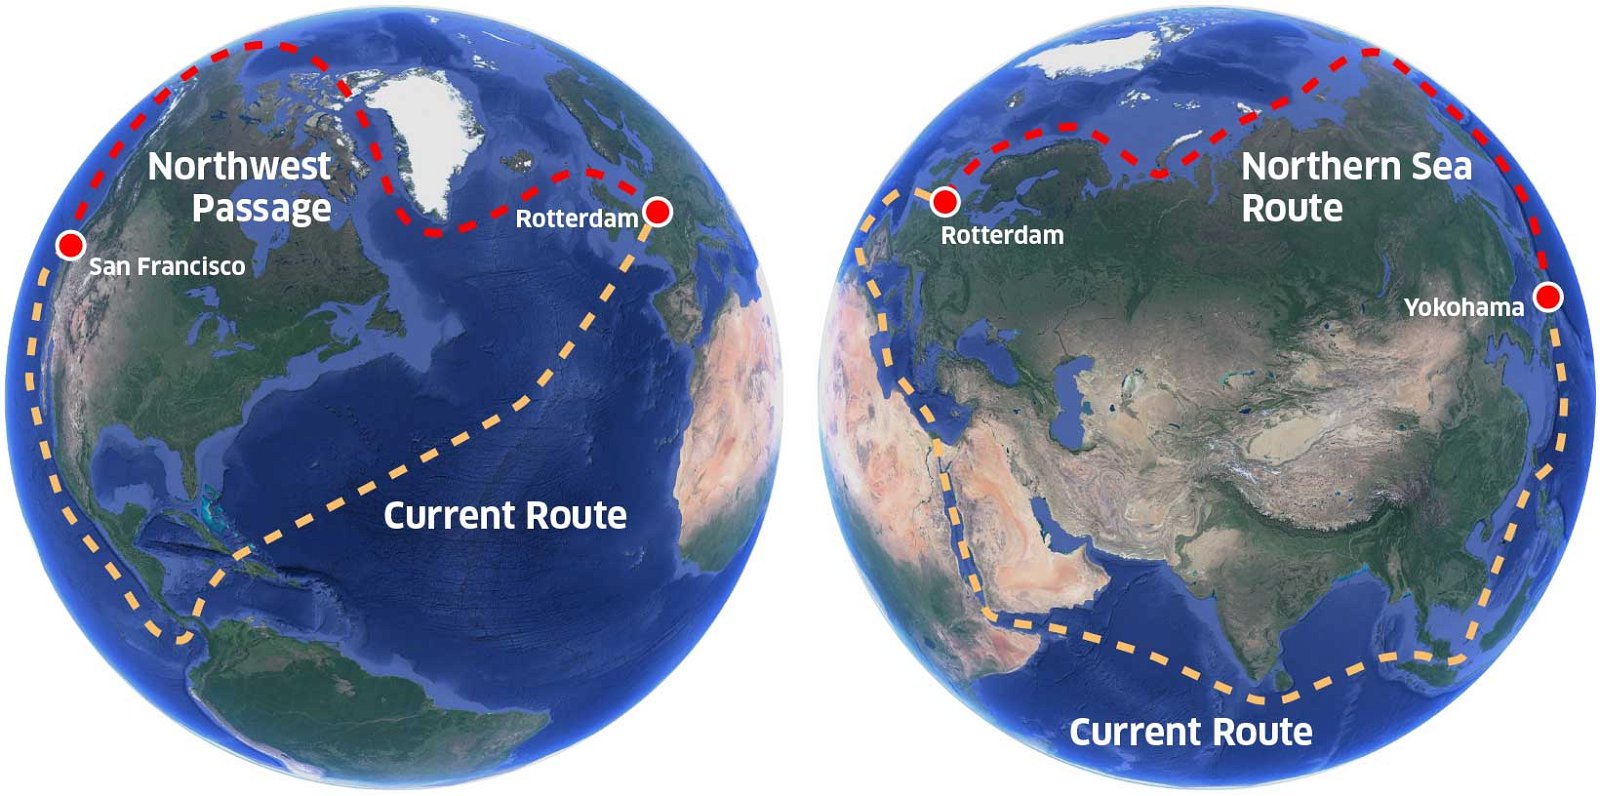 Northwest Passage, Northern Sea Route and Current Route 